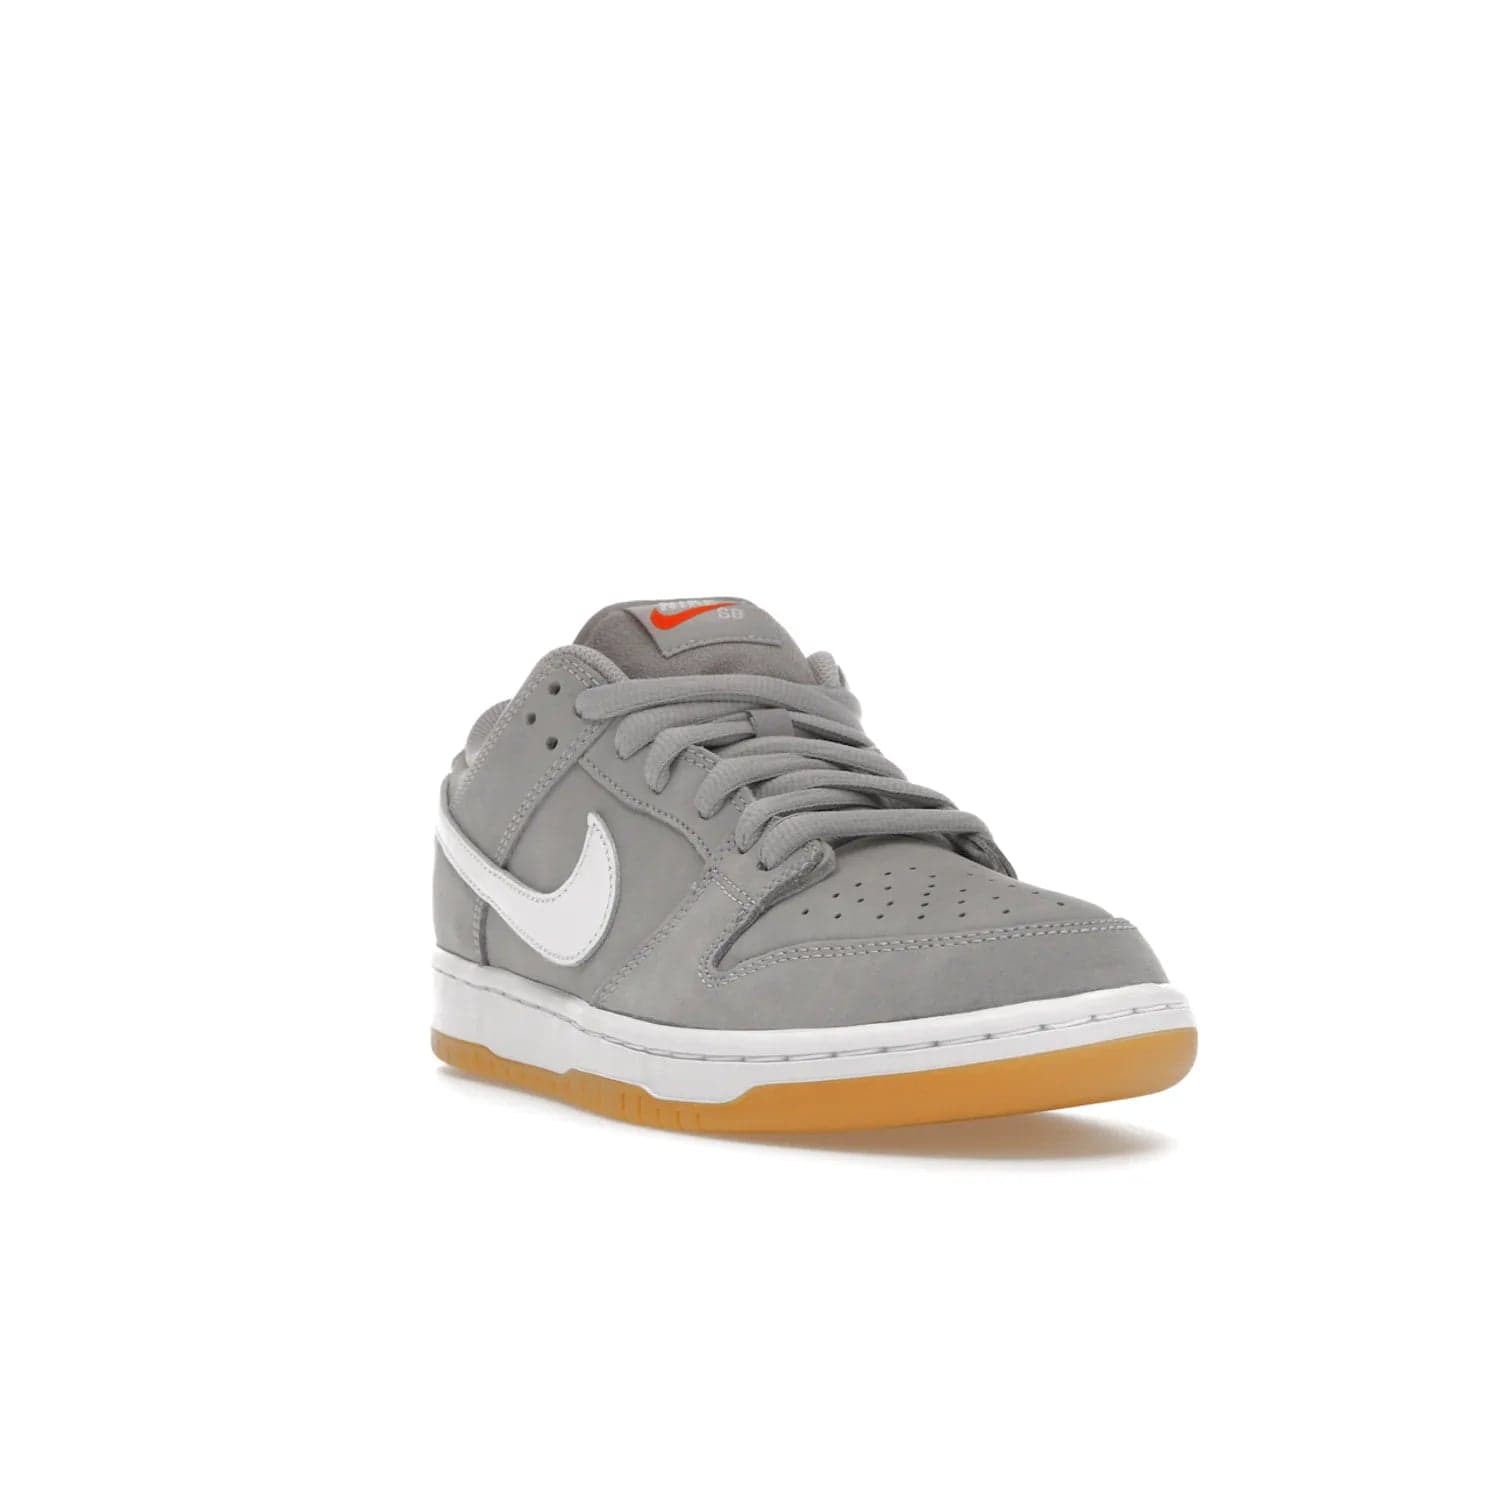 Nike SB Dunk Low Pro ISO Orange Label Wolf Grey Gum - Image 7 - Only at www.BallersClubKickz.com - Introducing Nike's SB Dunk Low Pro ISO Orange Label Wolf Grey Gum - a stylish shoe with a premium Wolf Grey upper, white leather Nike Swoosh, and an eye-catching gum outsole. With special Nike branding and packaging, this shoe adds a unique fashion statement. Out Feb. 24, 2023.